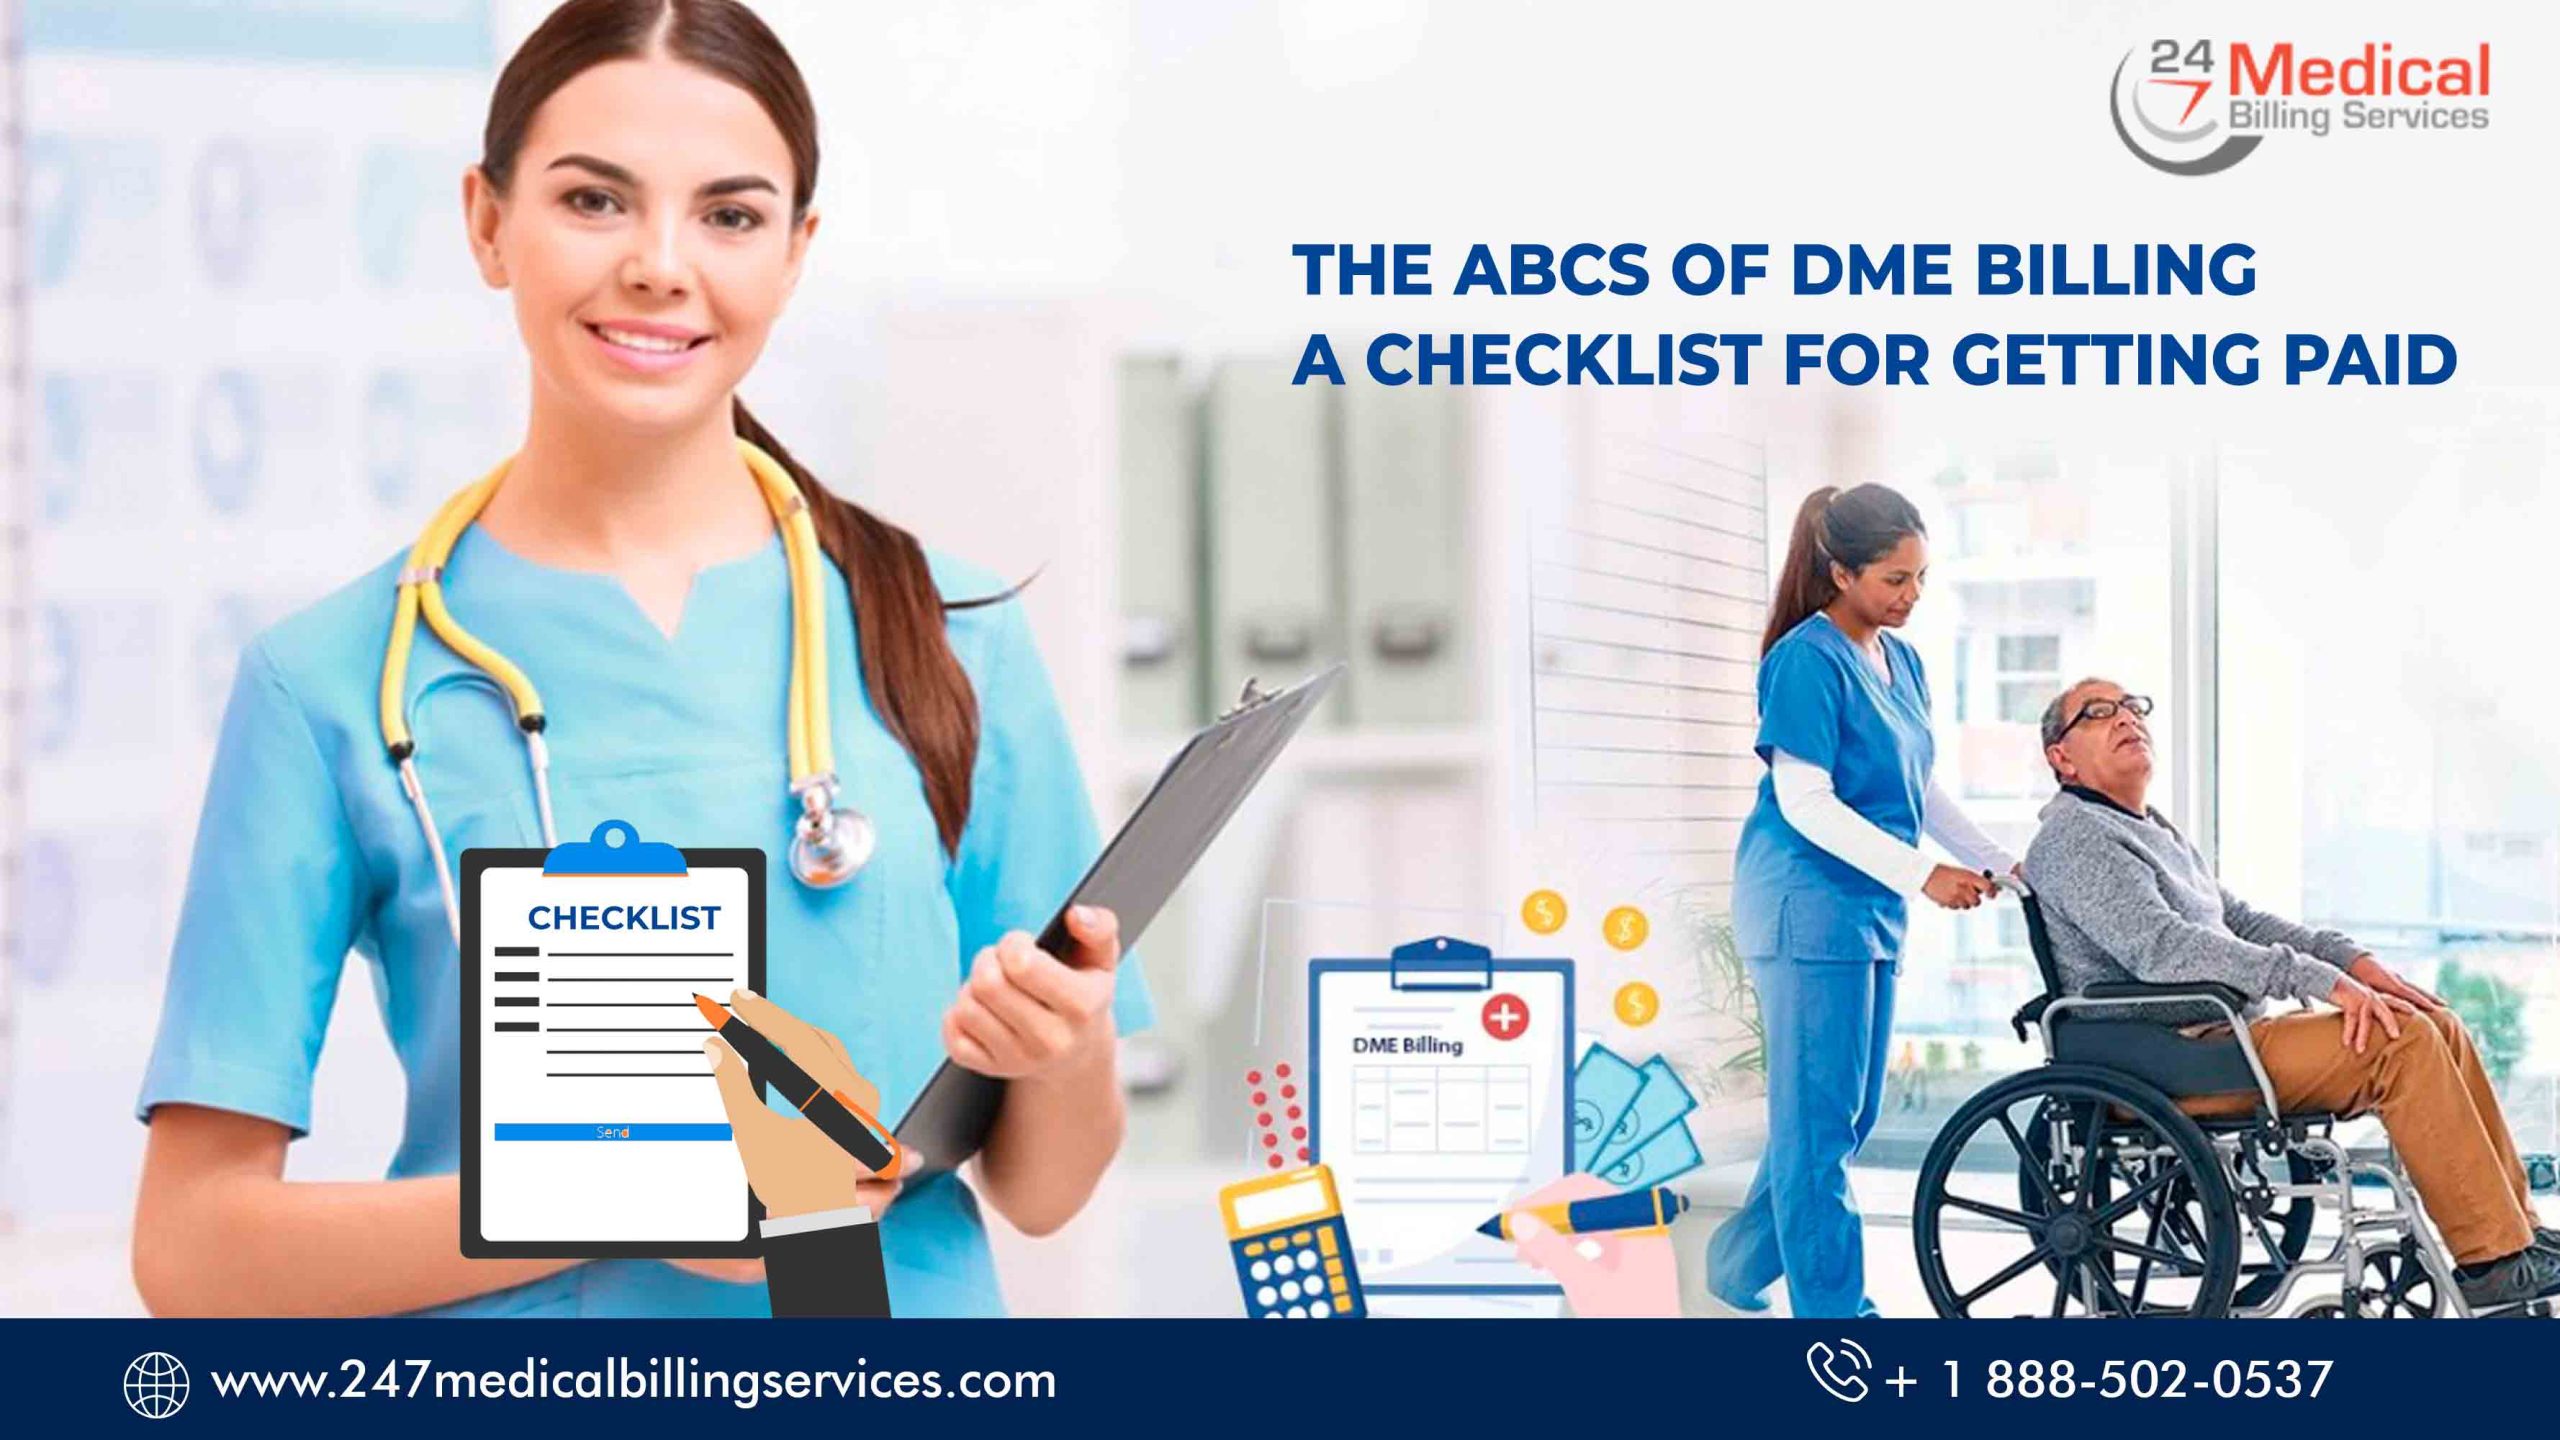  The ABCs of DME Billing: A Checklist for Getting Paid